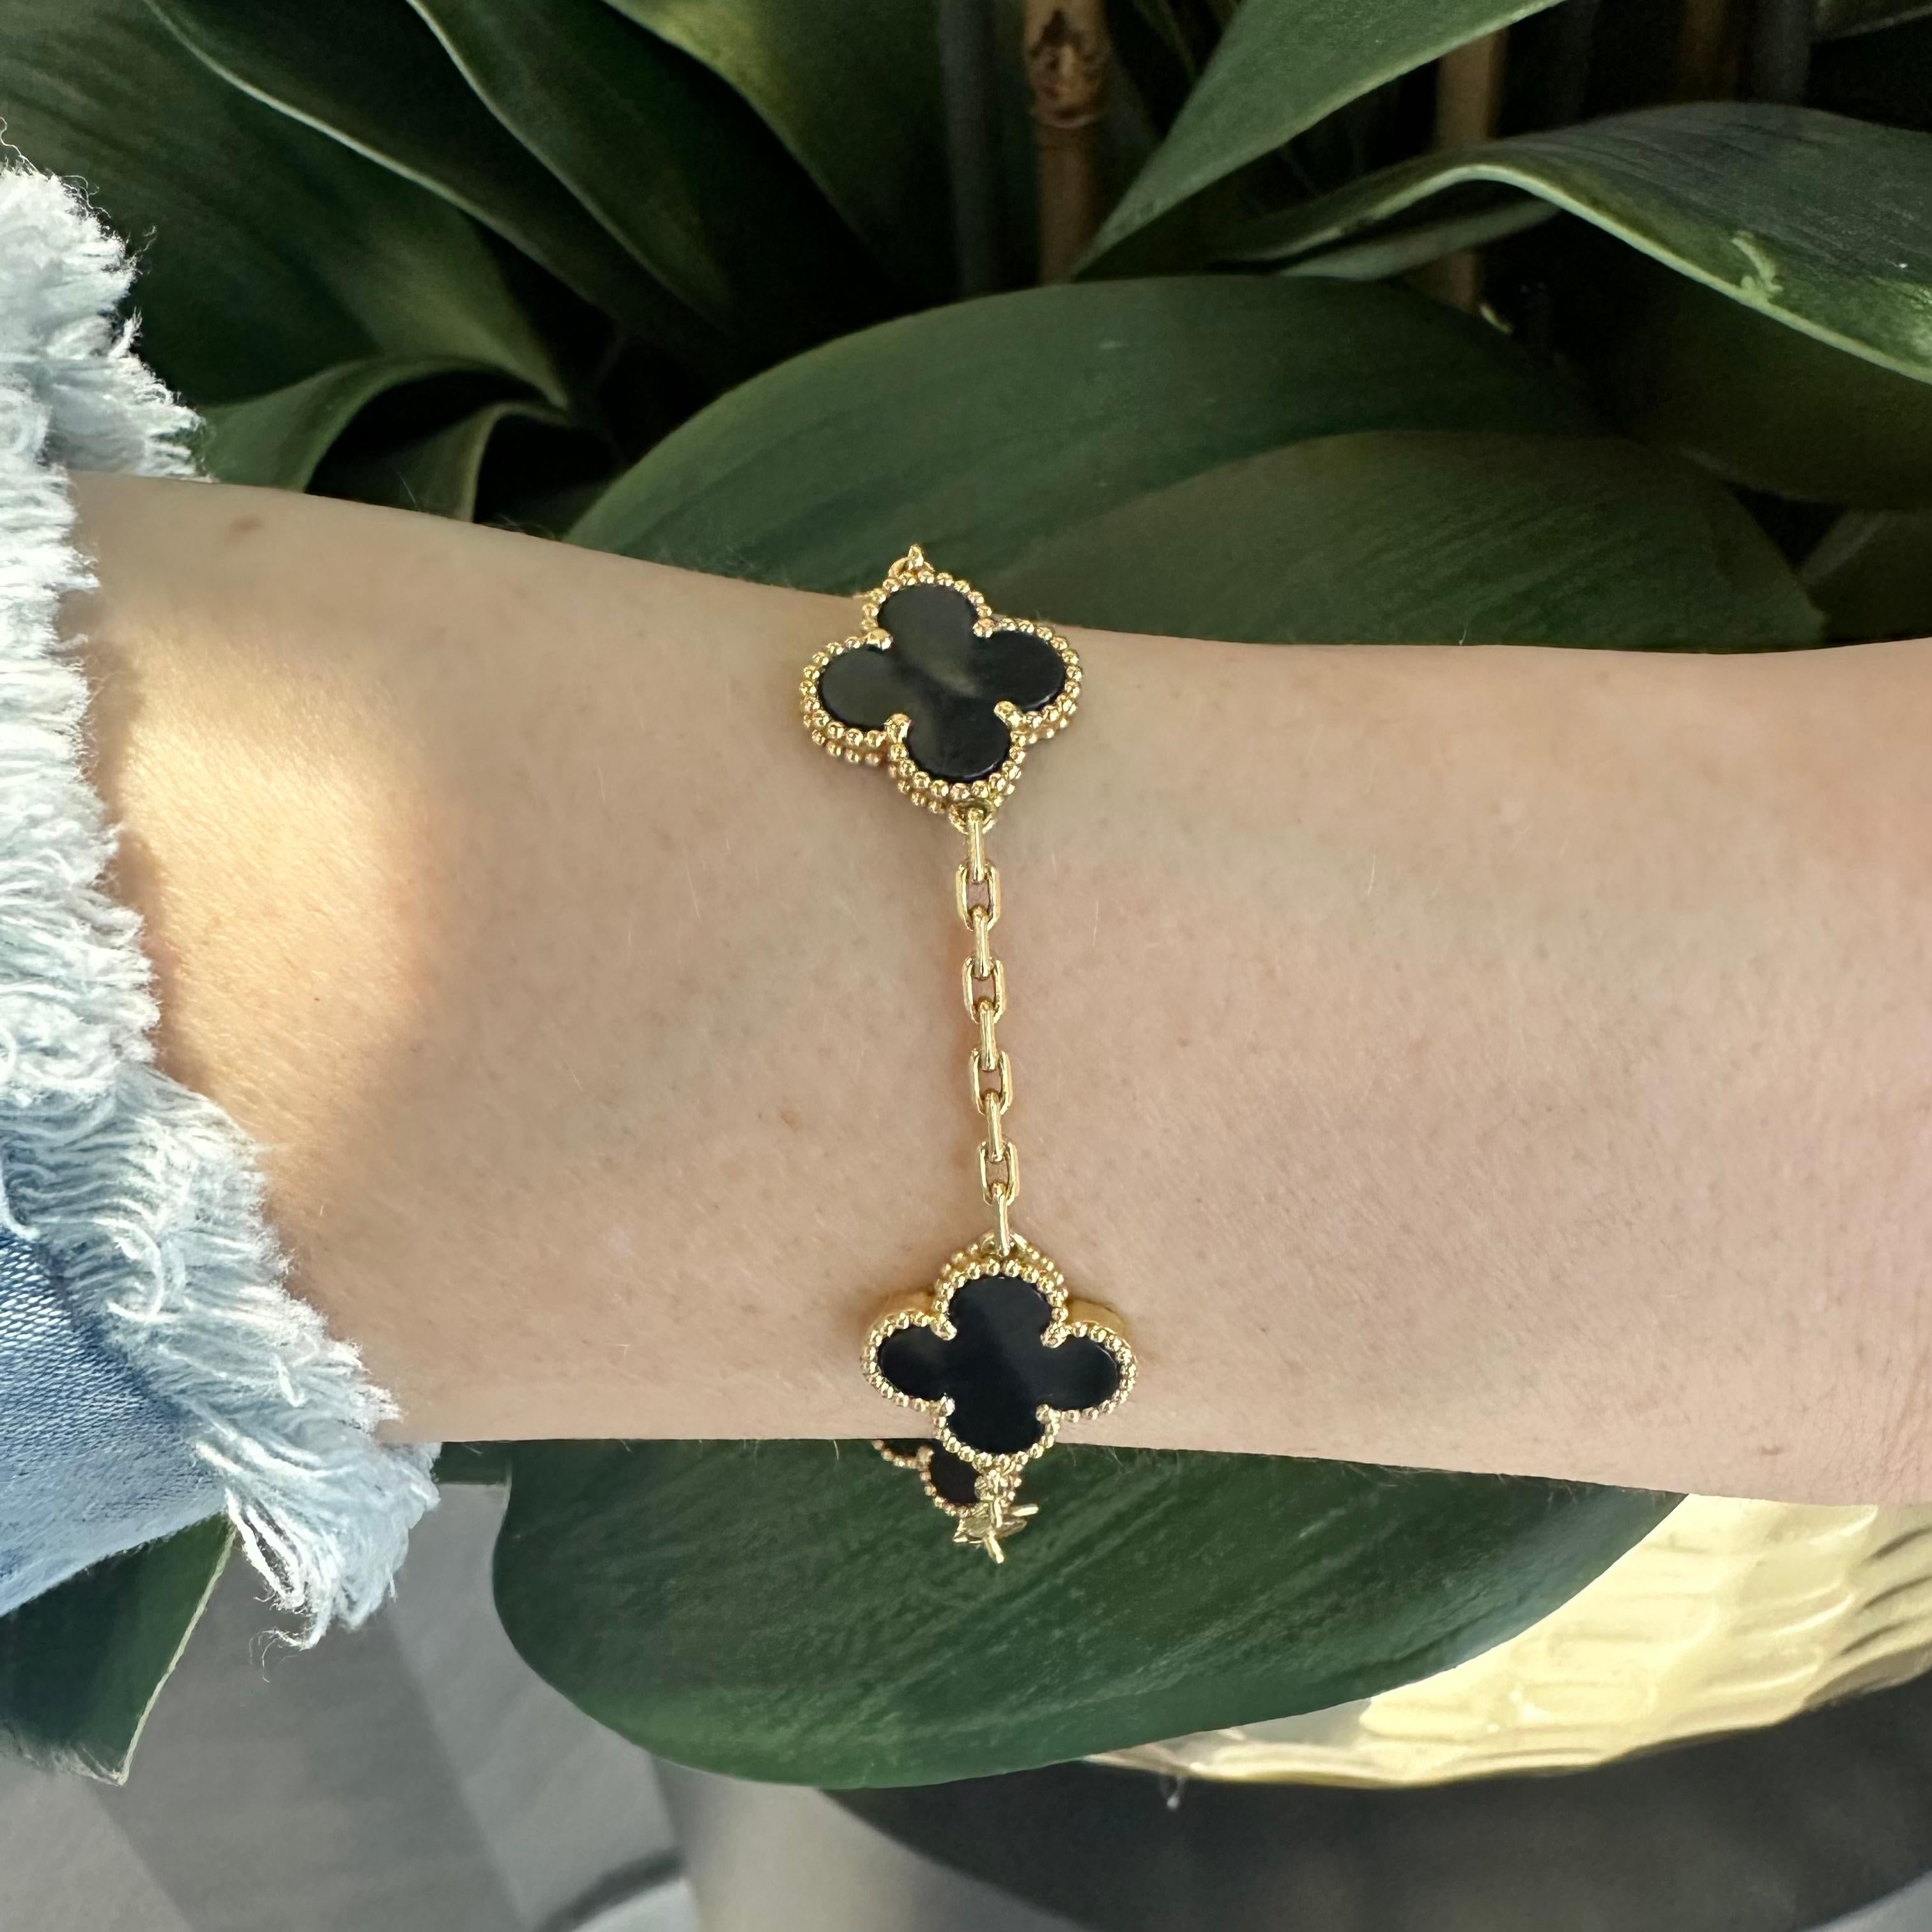 Van Cleef & Arpels Vintage Alhambra Onyx Bracelet in 18k Yellow Gold Full Set In Excellent Condition For Sale In Miami, FL